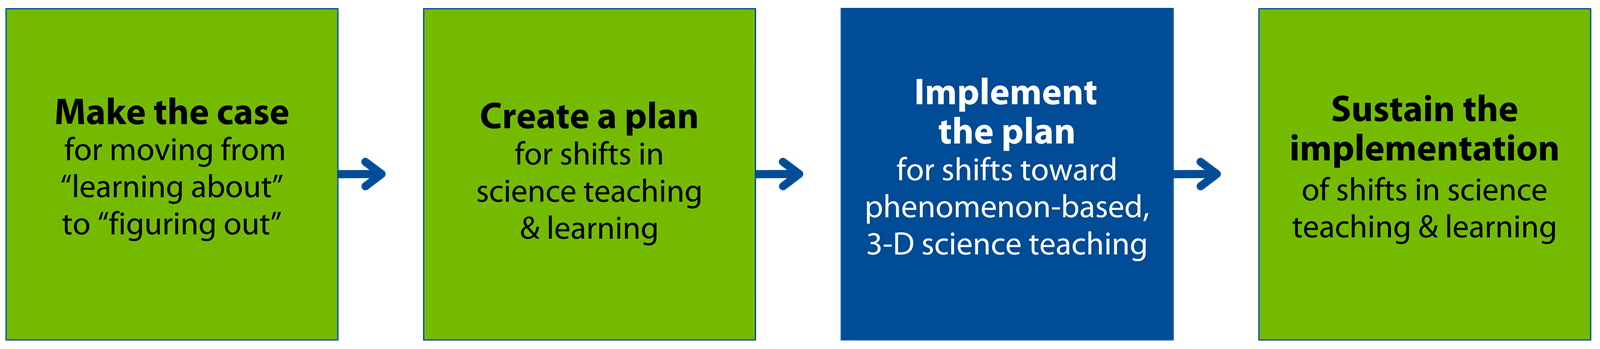 Implement the plan for shifts toward phenomenon-based 3-D science teaching